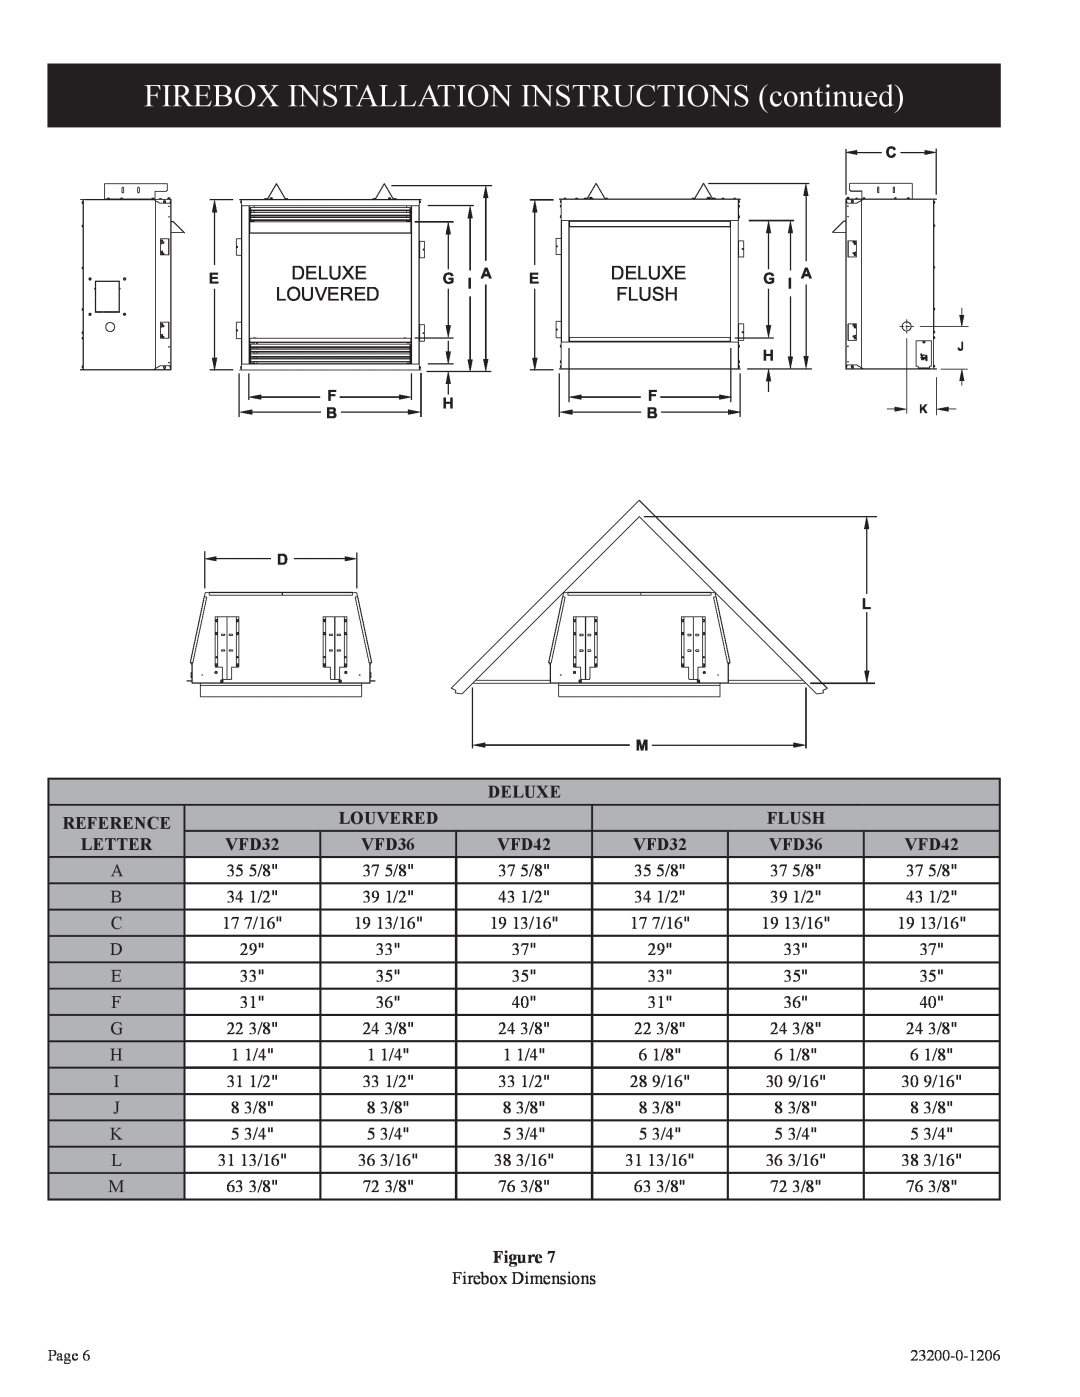 Empire Comfort Systems VFD32FB2DF-1 FIREBOX INSTALLATION INSTRUCTIONS continued, Edeluxe Louvered, Deluxe, Flush, Letter 